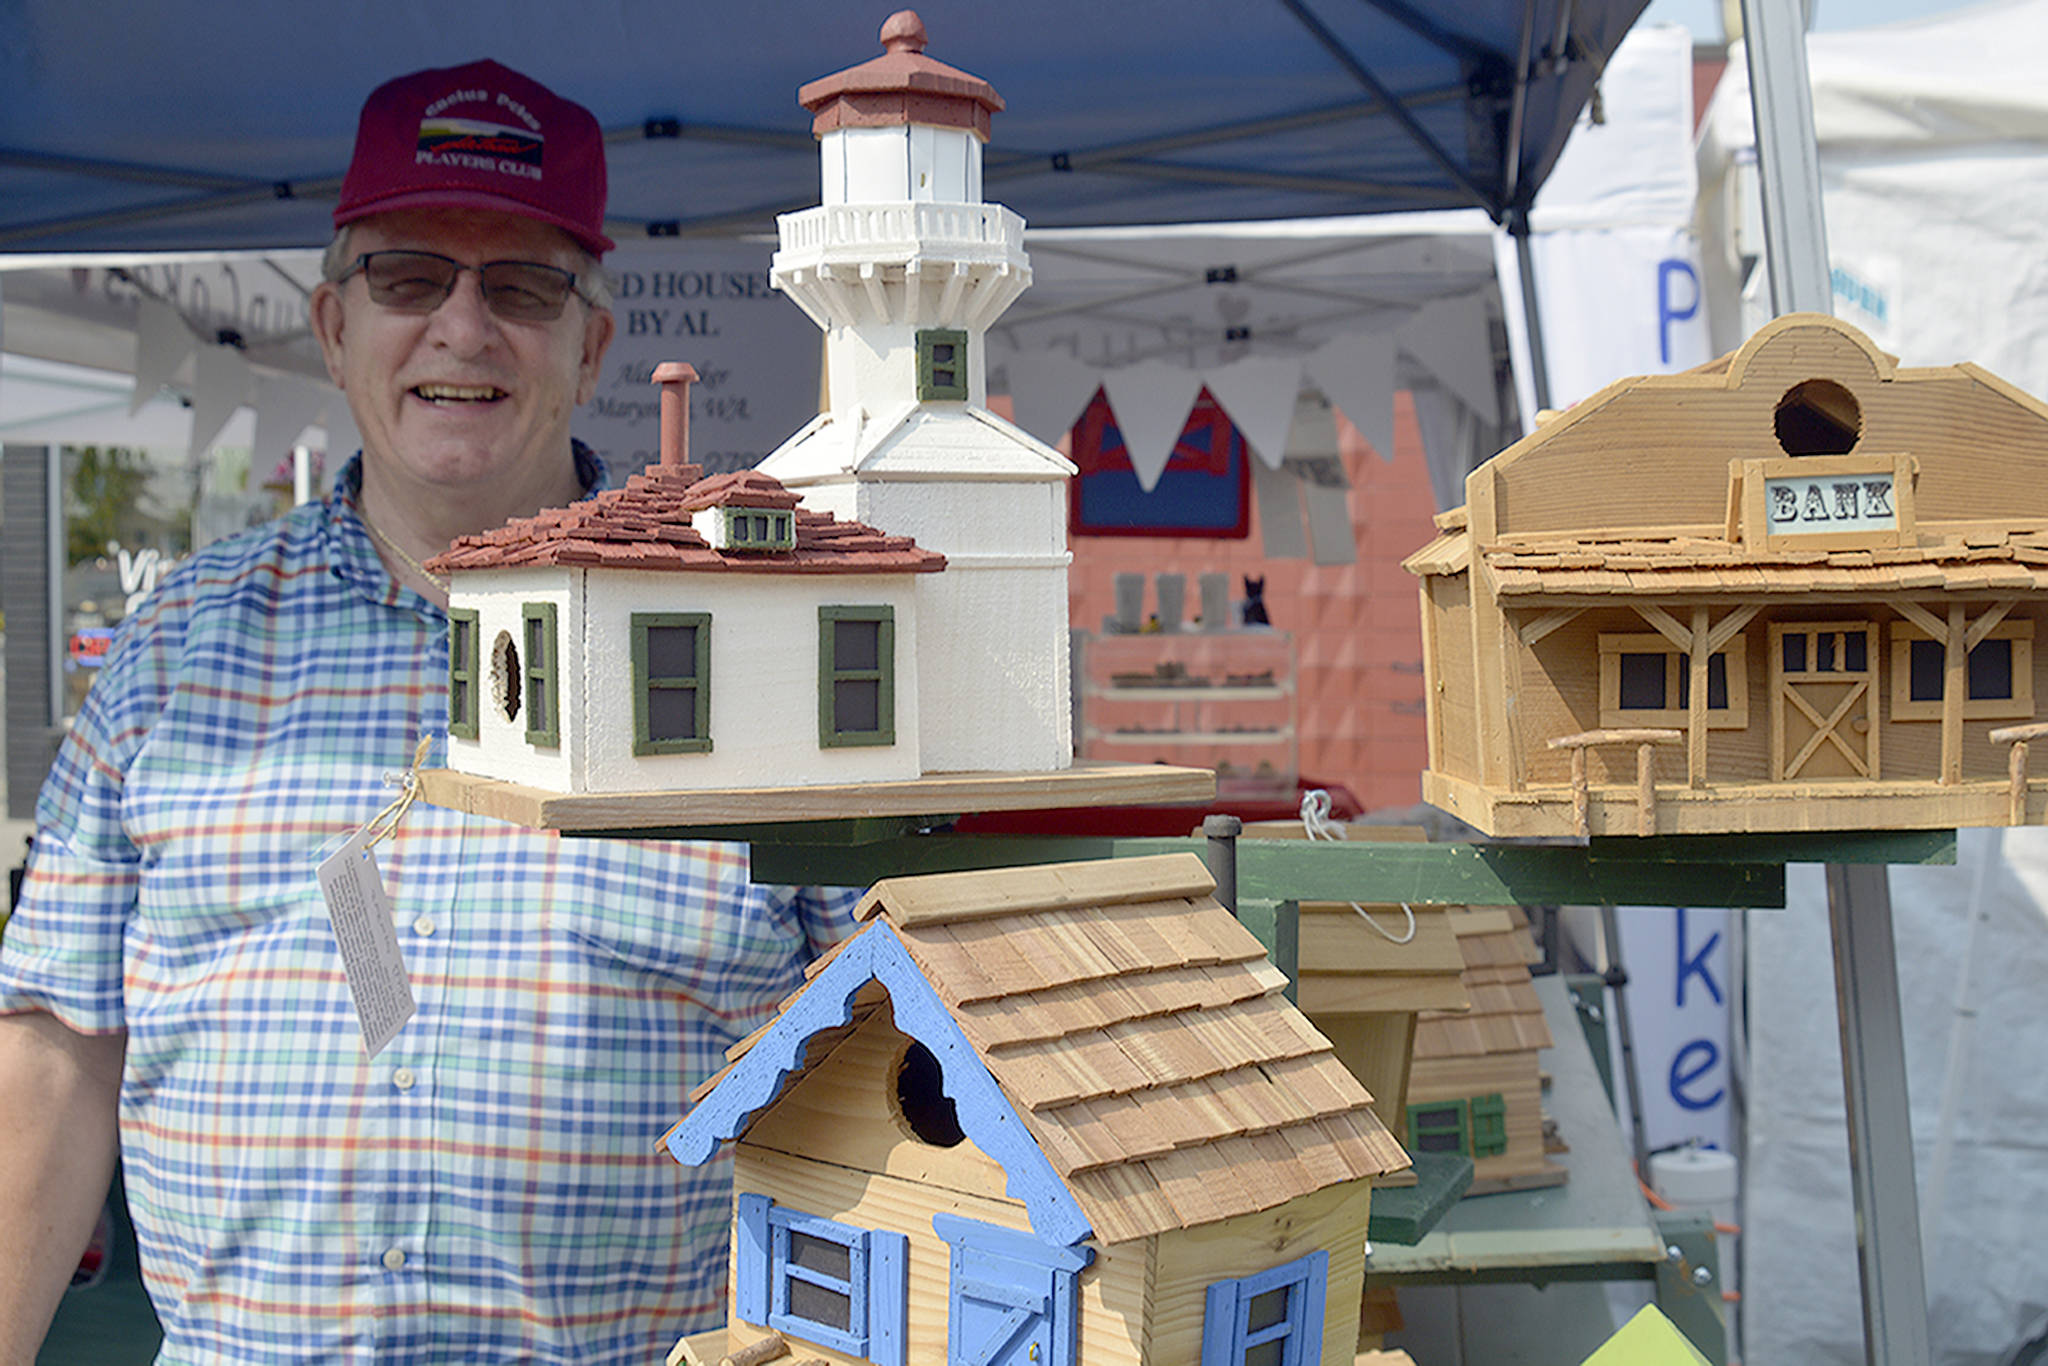 Marysville’s Homemade festival brings out the creativity of artists of all kinds of crafts (slide show)